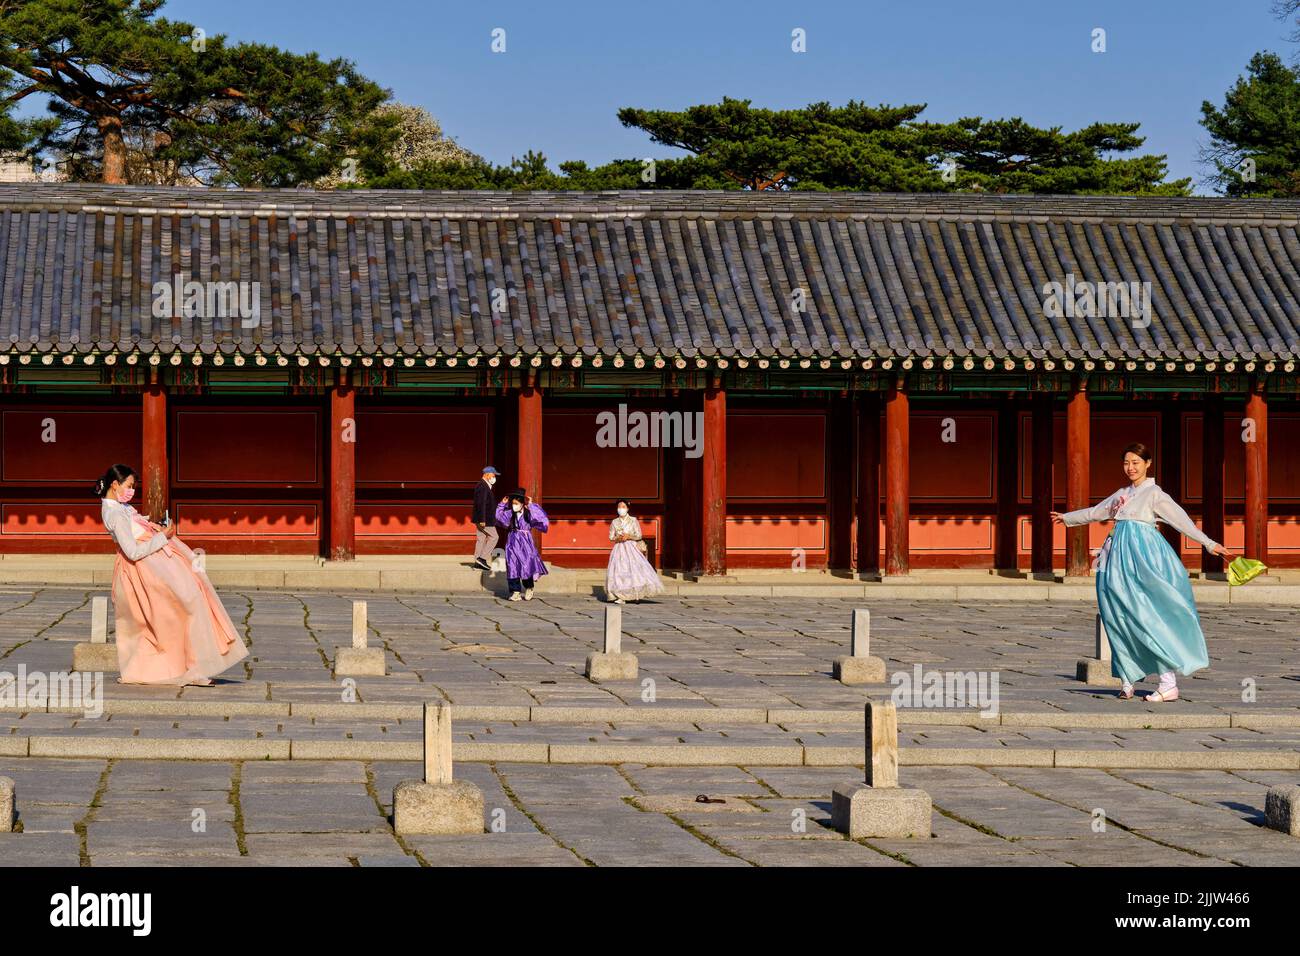 South Korea, Seoul, Jongno-gu district, Changdeokgung Palace or Palace of Prosperity built in the 15th century under the Joseon dynasty (UNESCO World Stock Photo